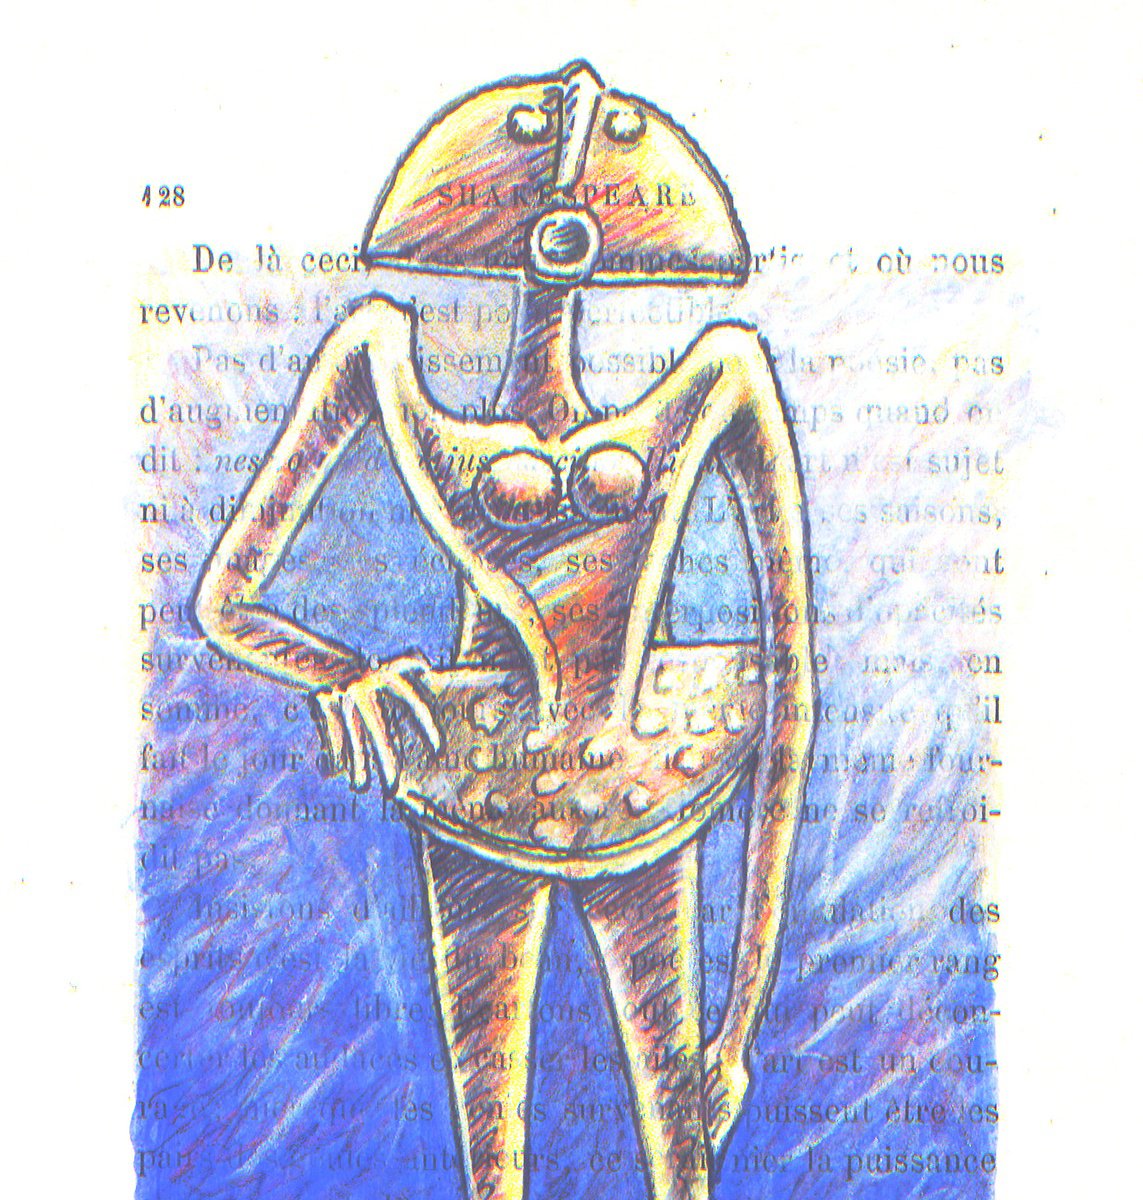 Savanna, drawing of the sculpture by Jean-Luc Lacroix